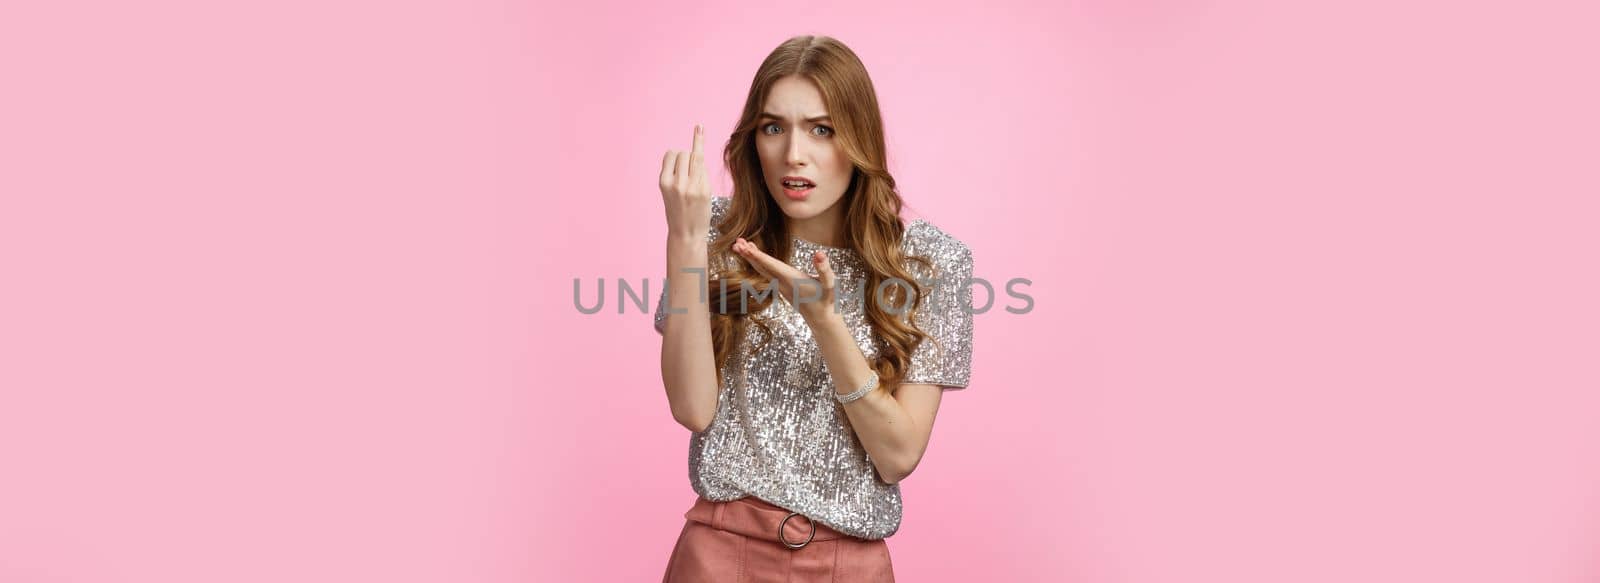 Glamour pissed girlfriend arguing boyfriend questioned bothered when wedding showing ring finger frustrated upset man commitment issues, wanna marry, ask when become bride, standing pink background by Benzoix